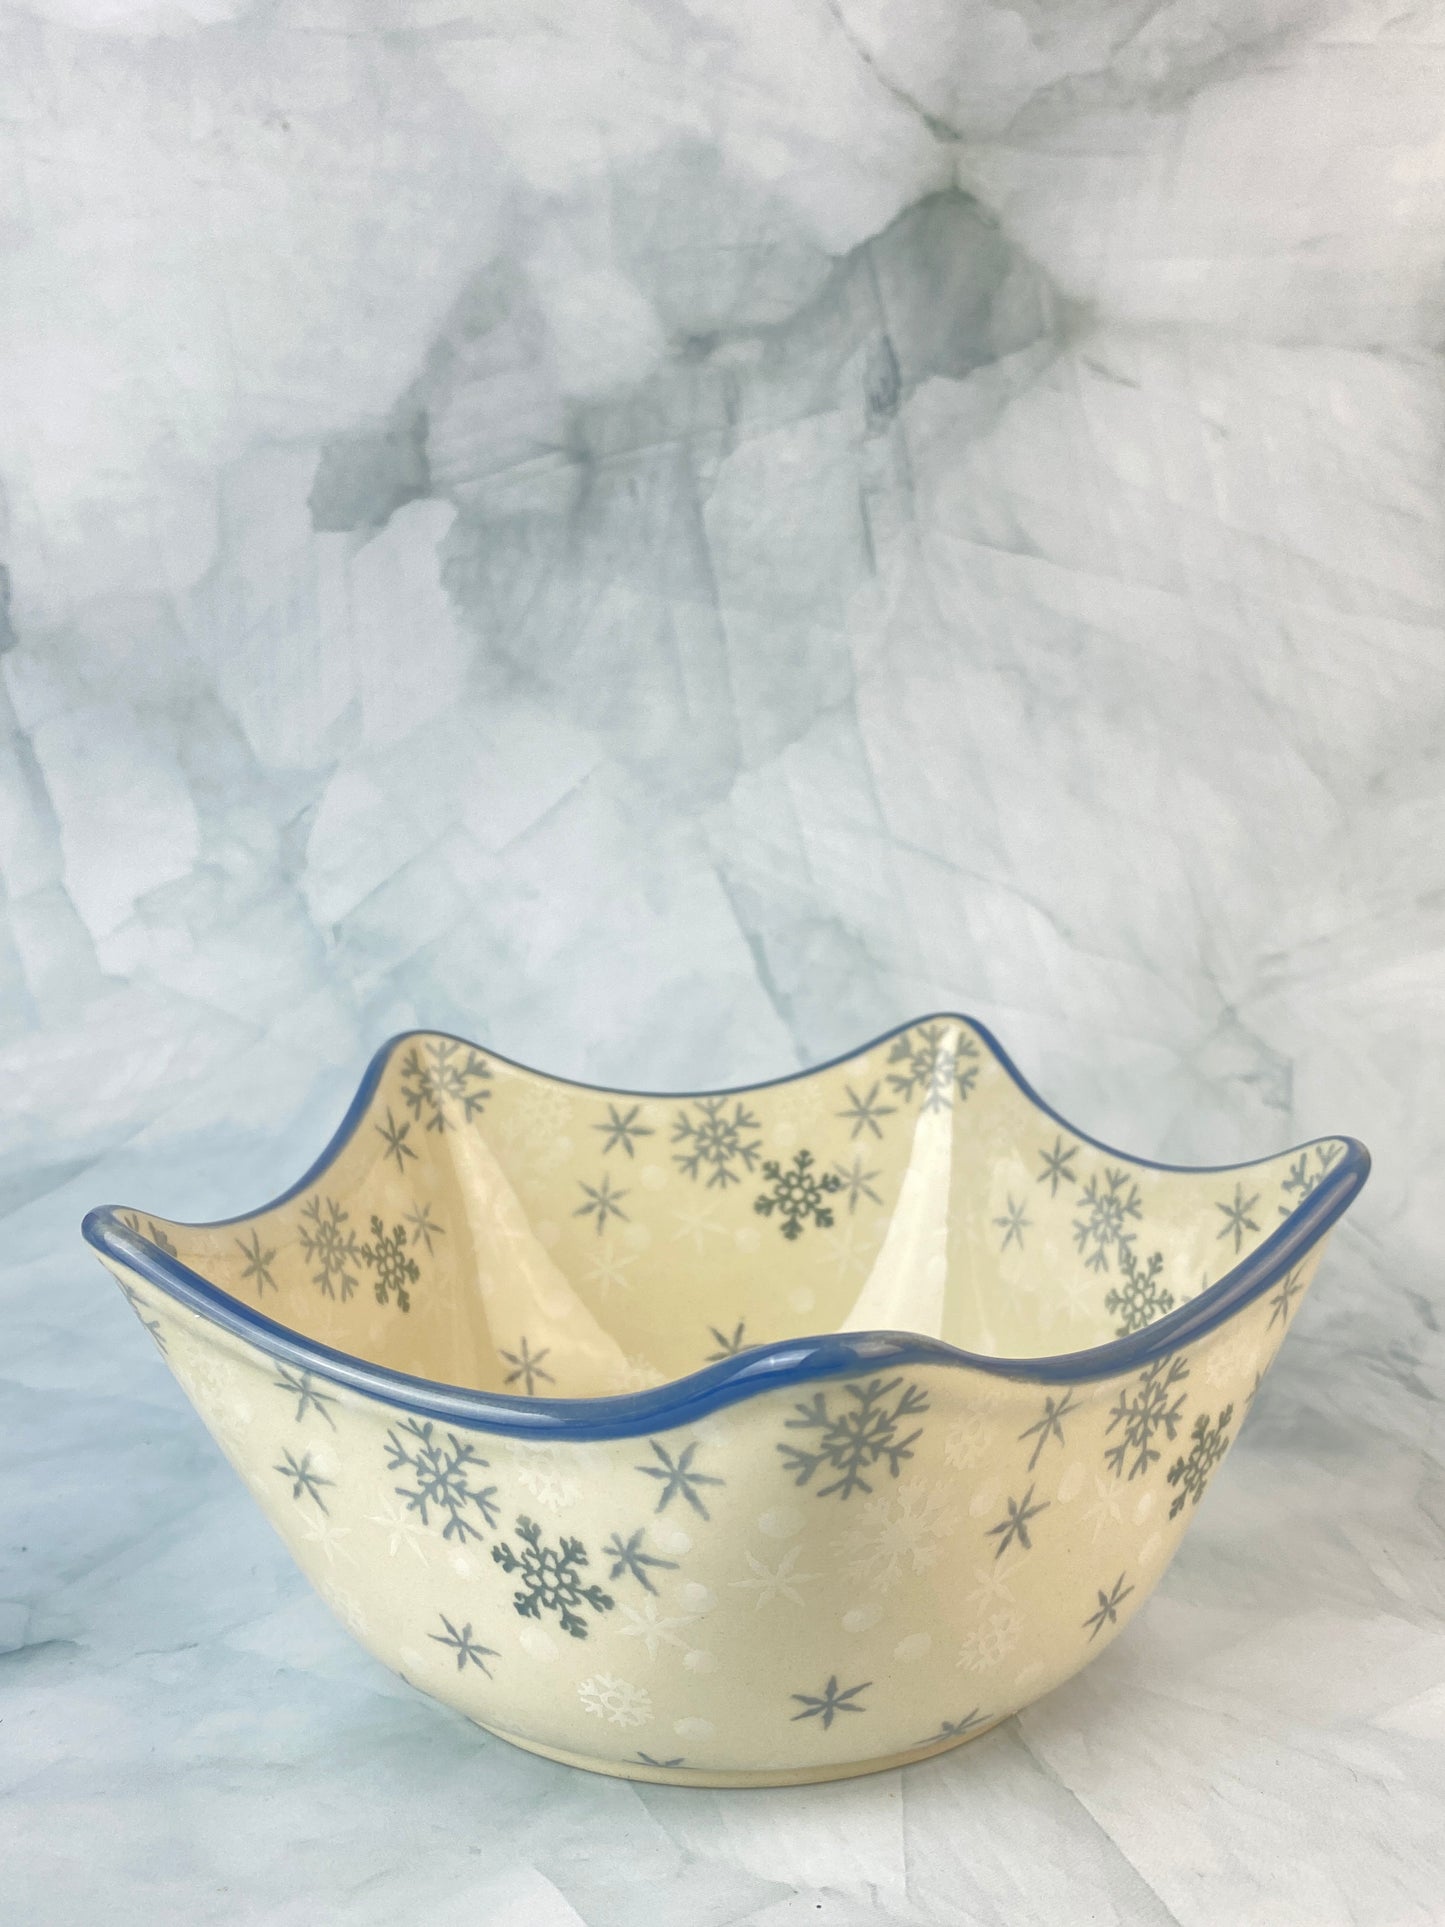 Five Pointed Bowl - Shape 814 - Pattern 2712